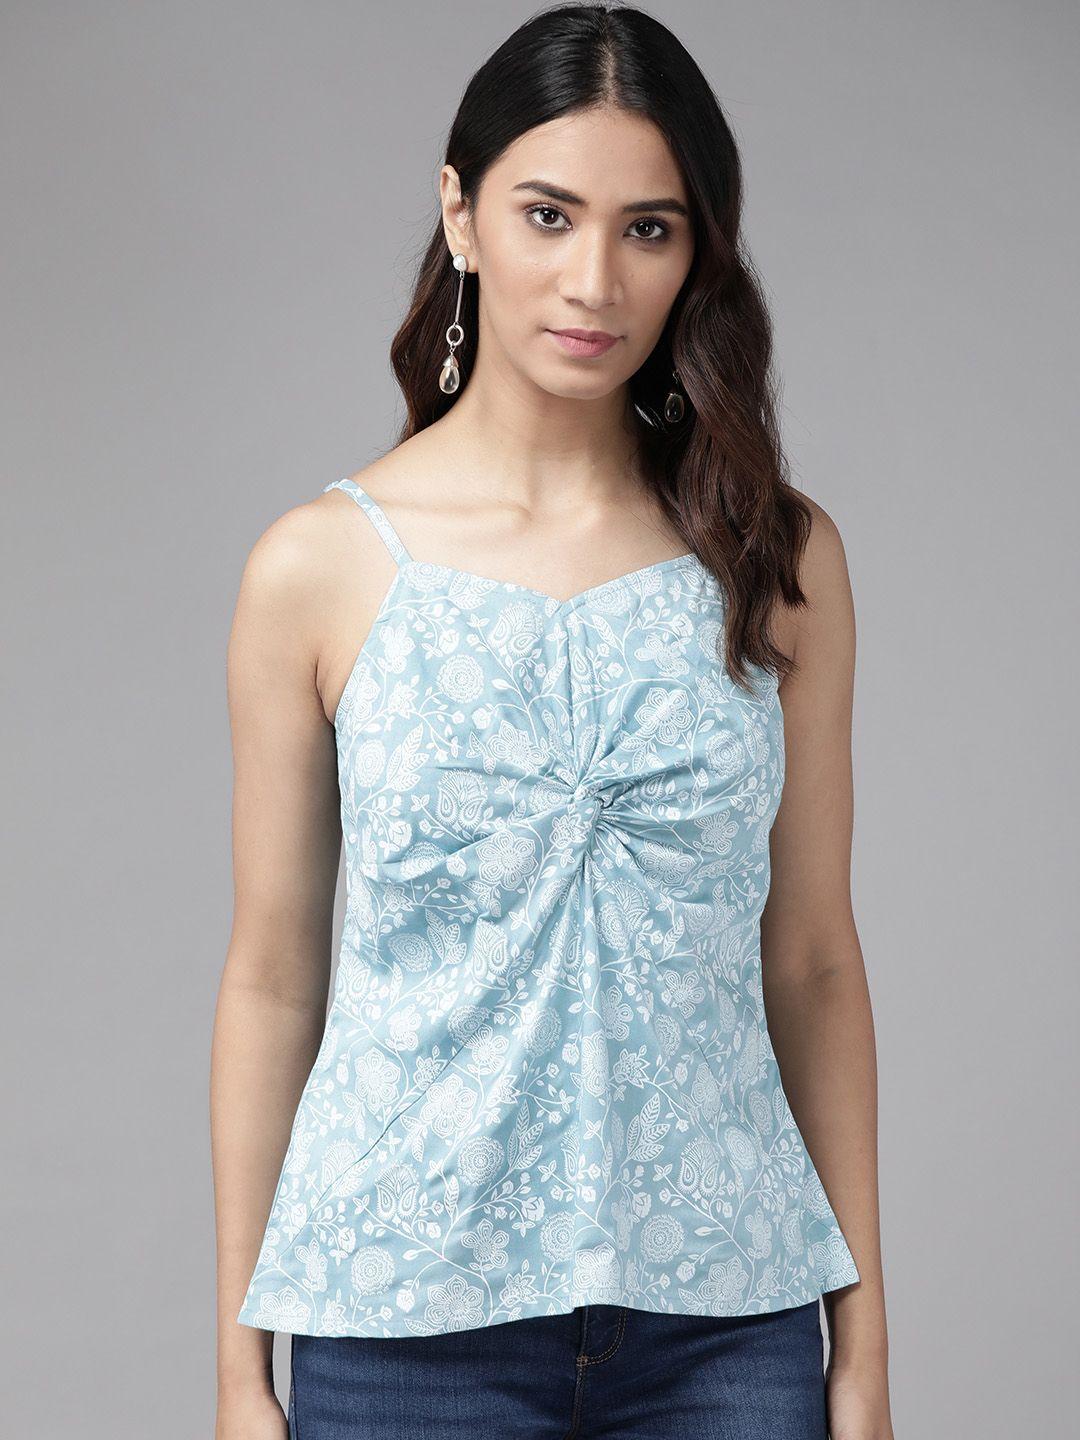 yash-gallery-blue-&-white-floral-printed-twisted-regular-top